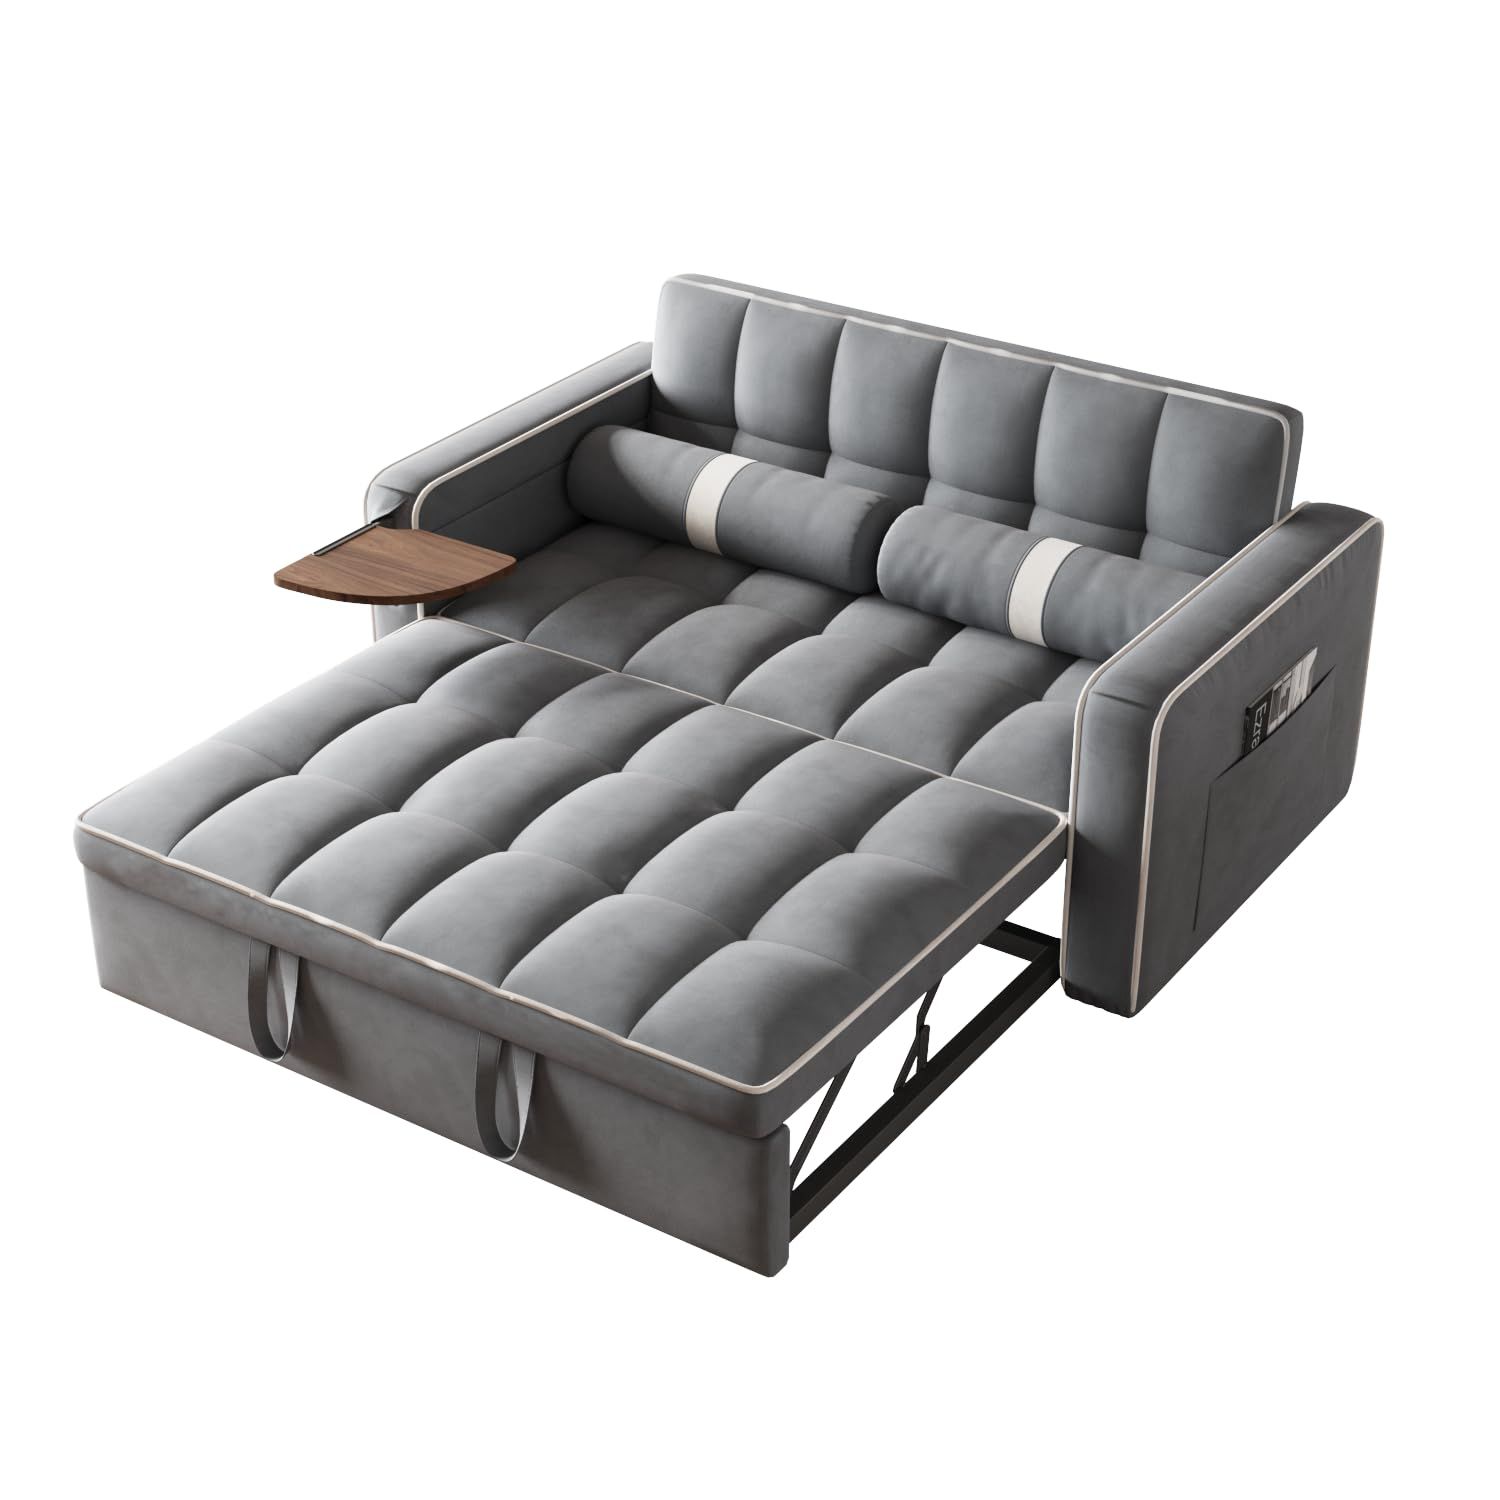 The Ultimate in Comfort and Convenience: Loveseat Sofa Beds with Storage